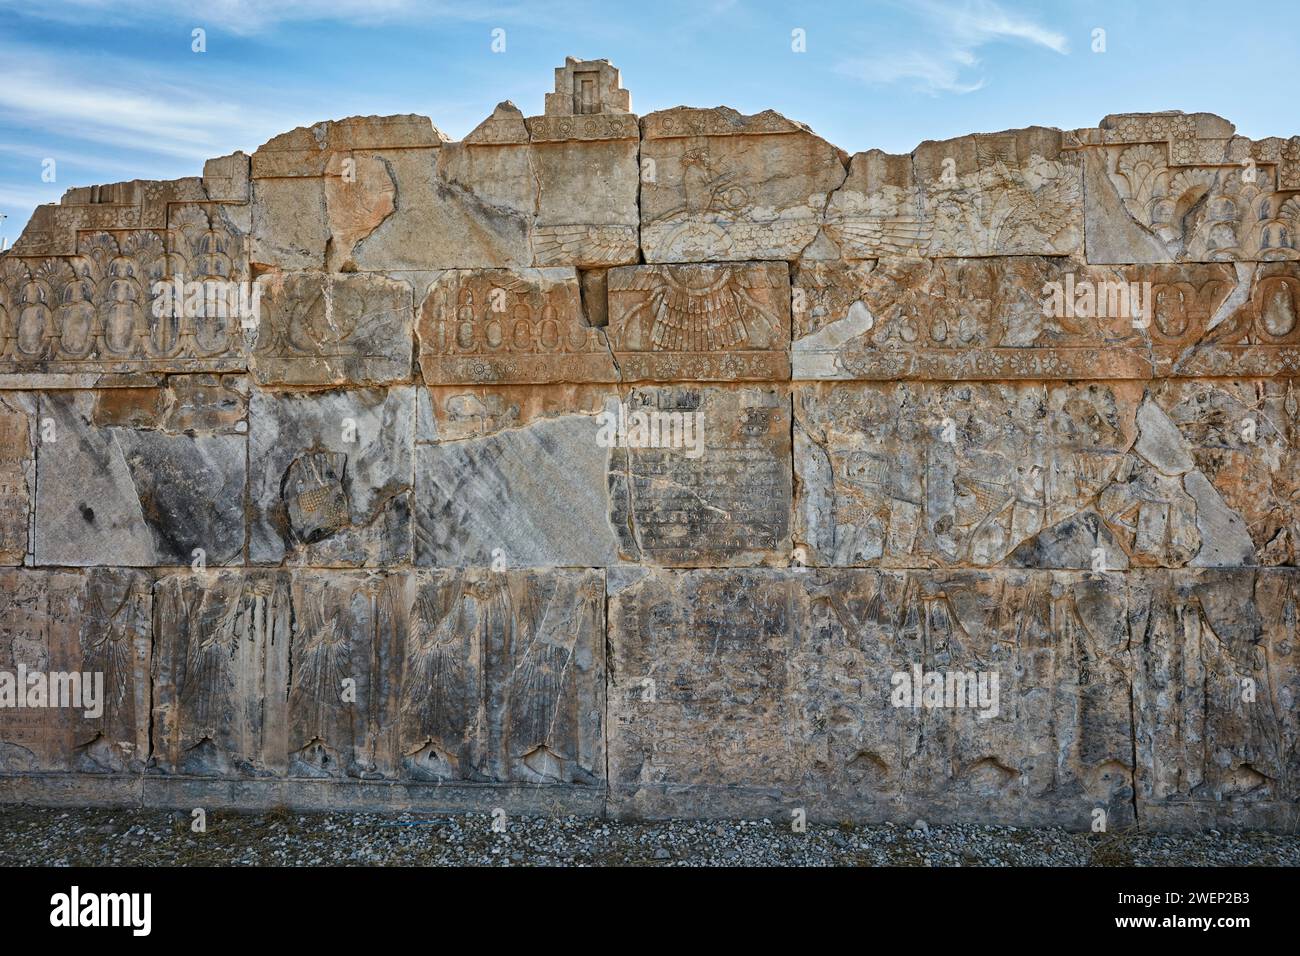 Badly damaged reliefs on a platform of a ruined building in Persepolis, capital of the Achaemenid Empire (550–330 BC), Iran. Stock Photo